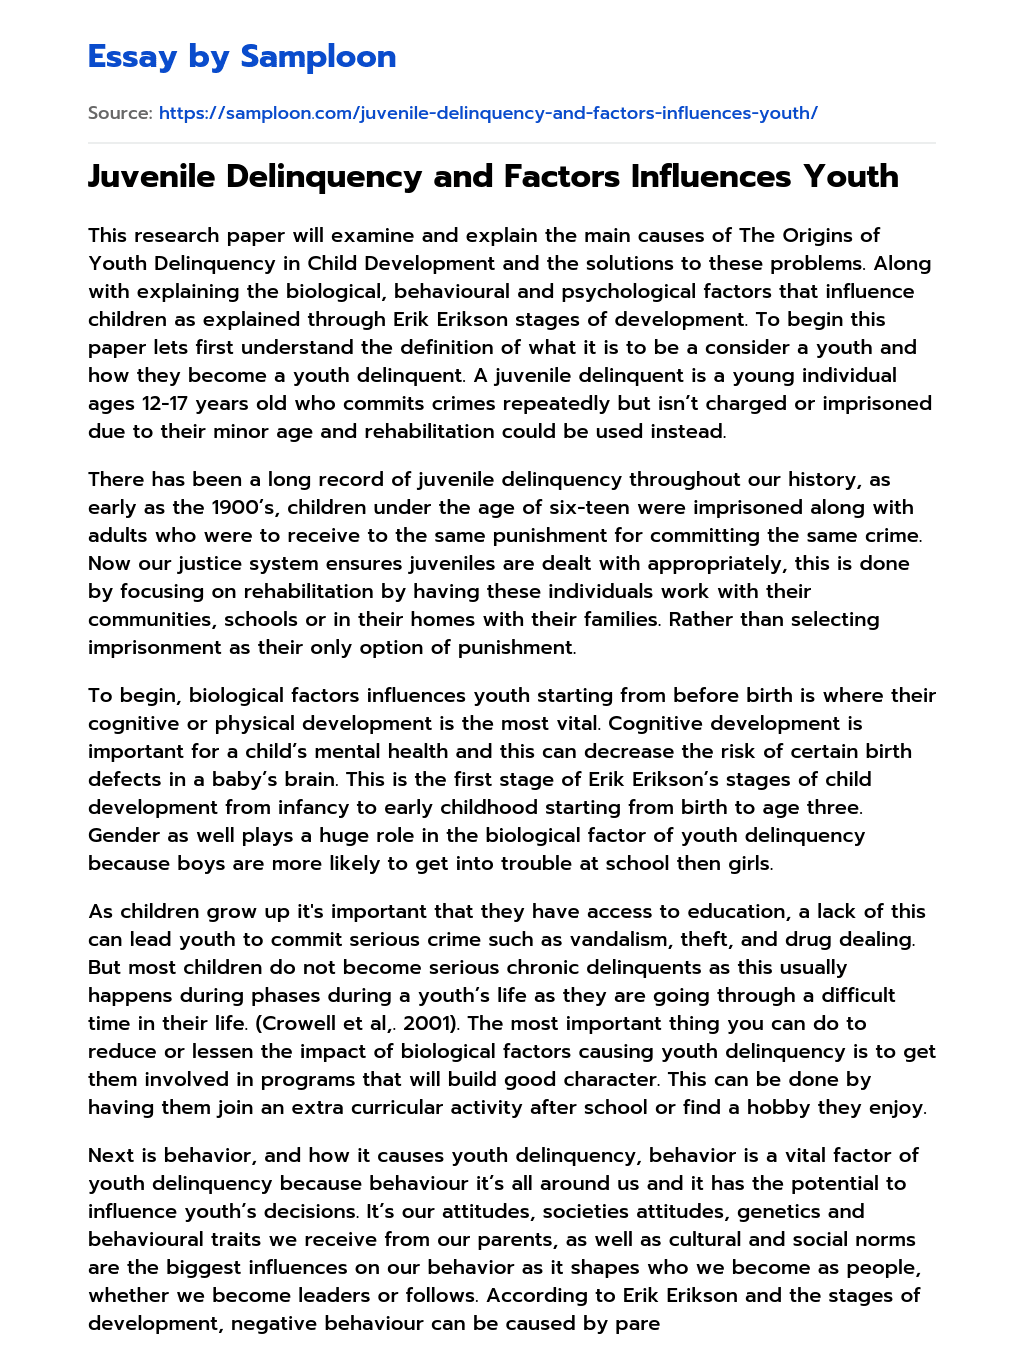 Juvenile Delinquency and Factors Influences Youth essay